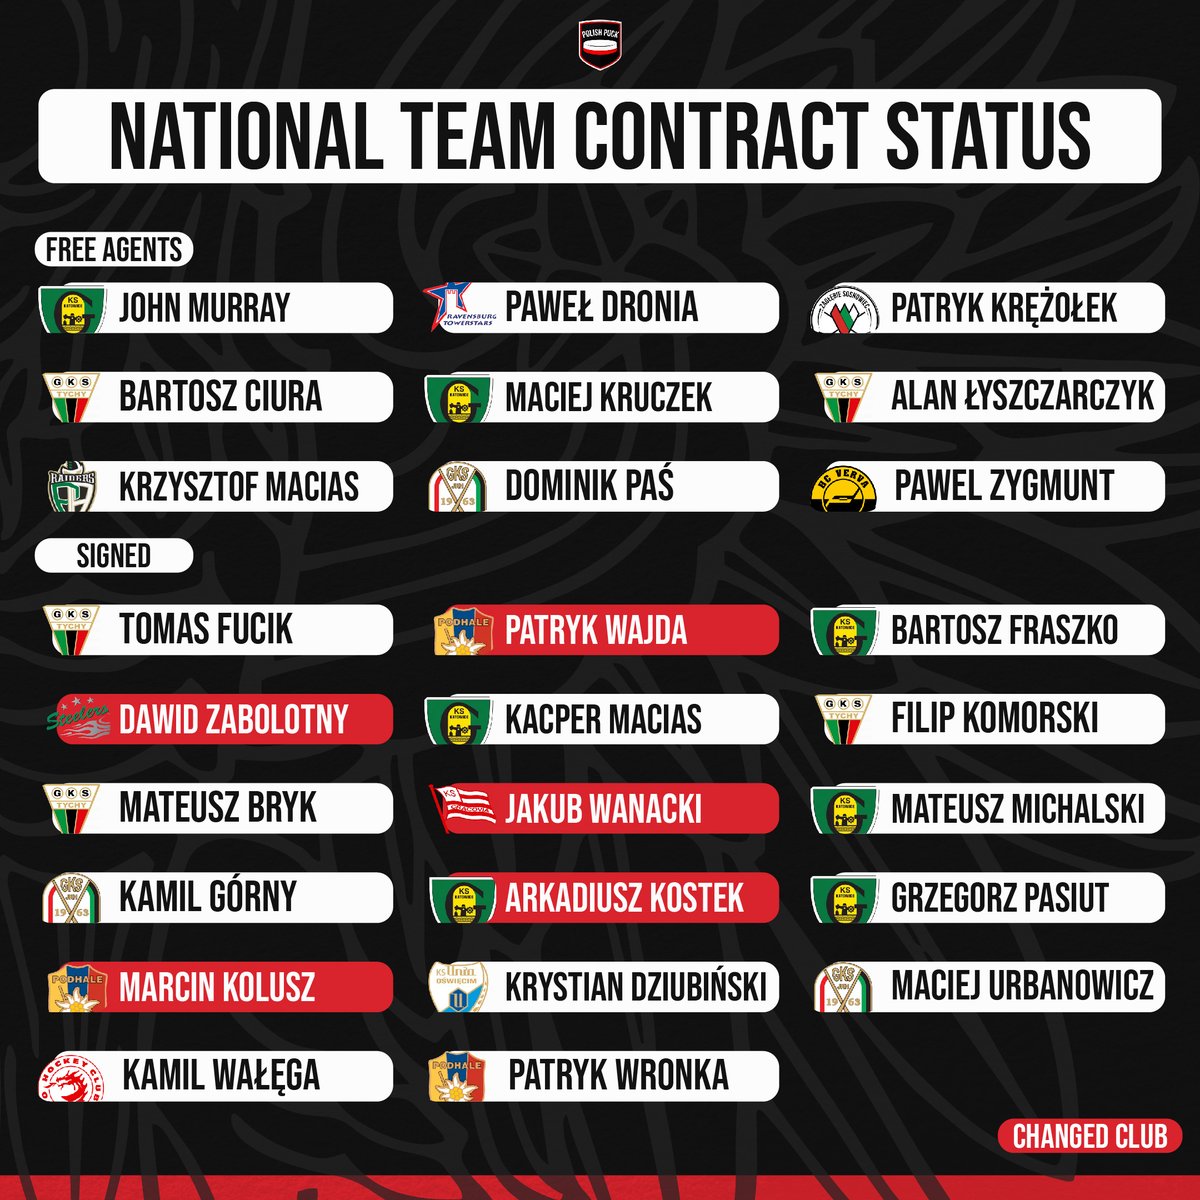 Few days after the Worlds have ended, and 9 national team members remained unsigned. We expect Zygmunt to sign and stay abroad soon.